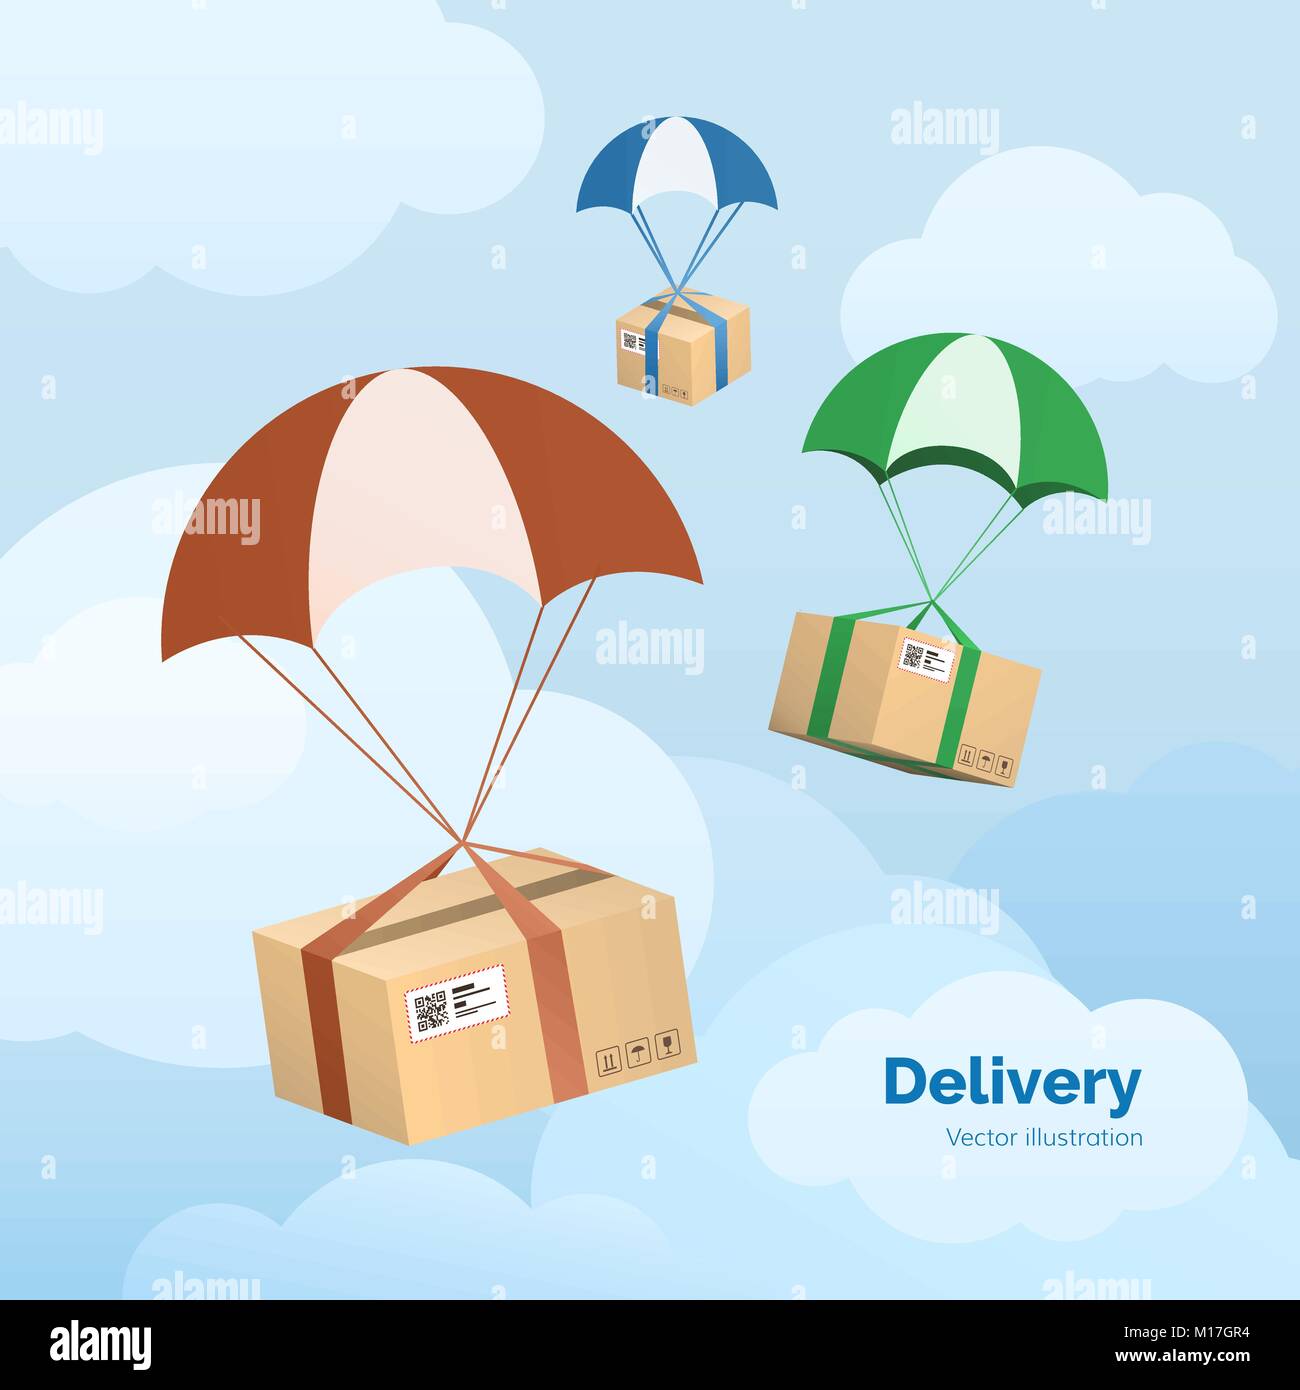 Delivery Service. Packages are flying on parachutes. Parcels in the sky. Flat vector illustration Stock Vector